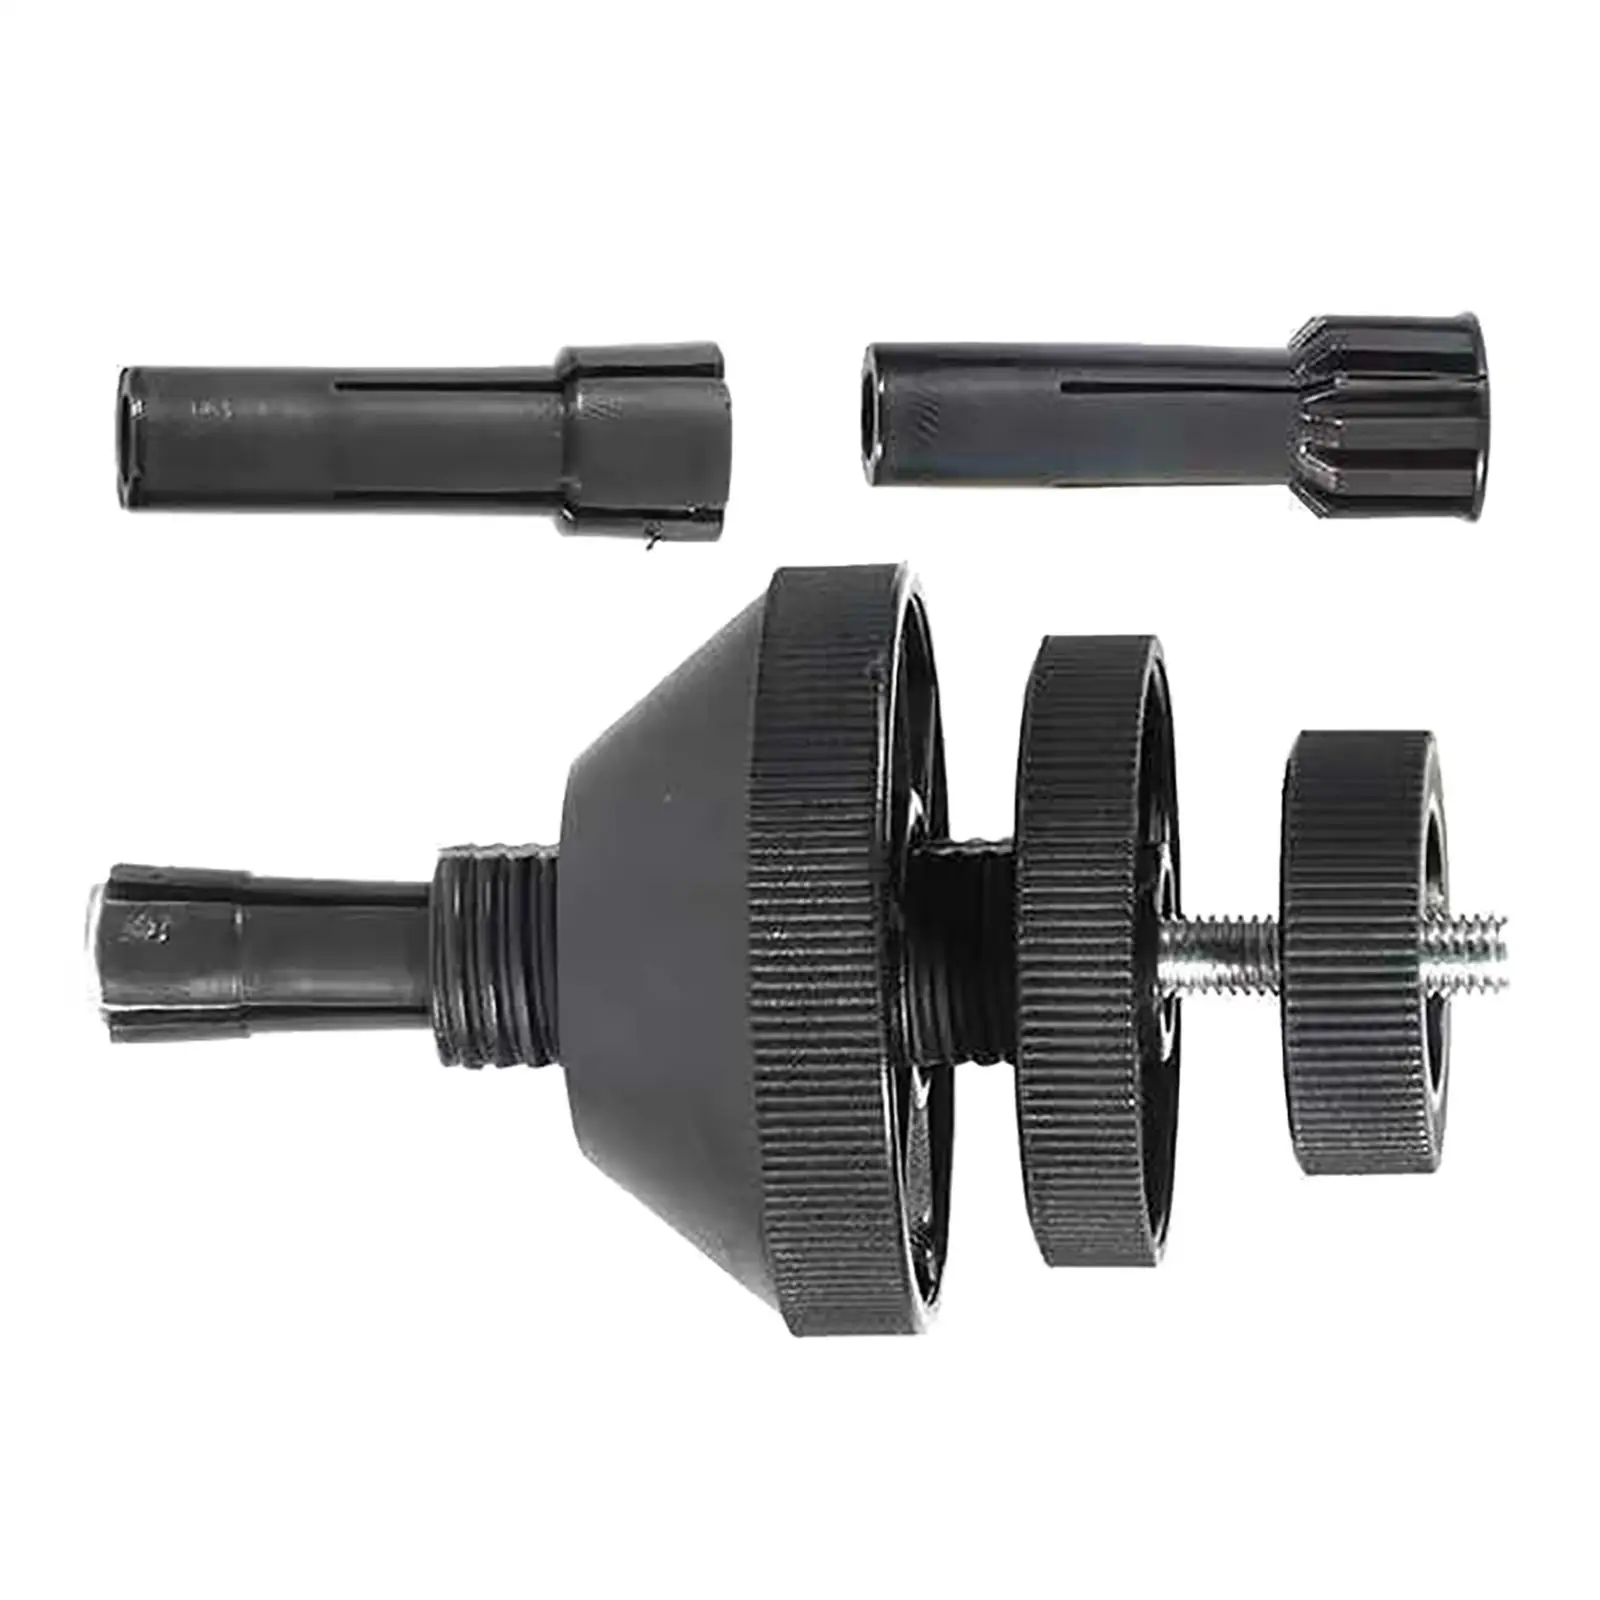 Clutch Alignment Set Universal Clutch Aligning Kit Fit for Car Clutch